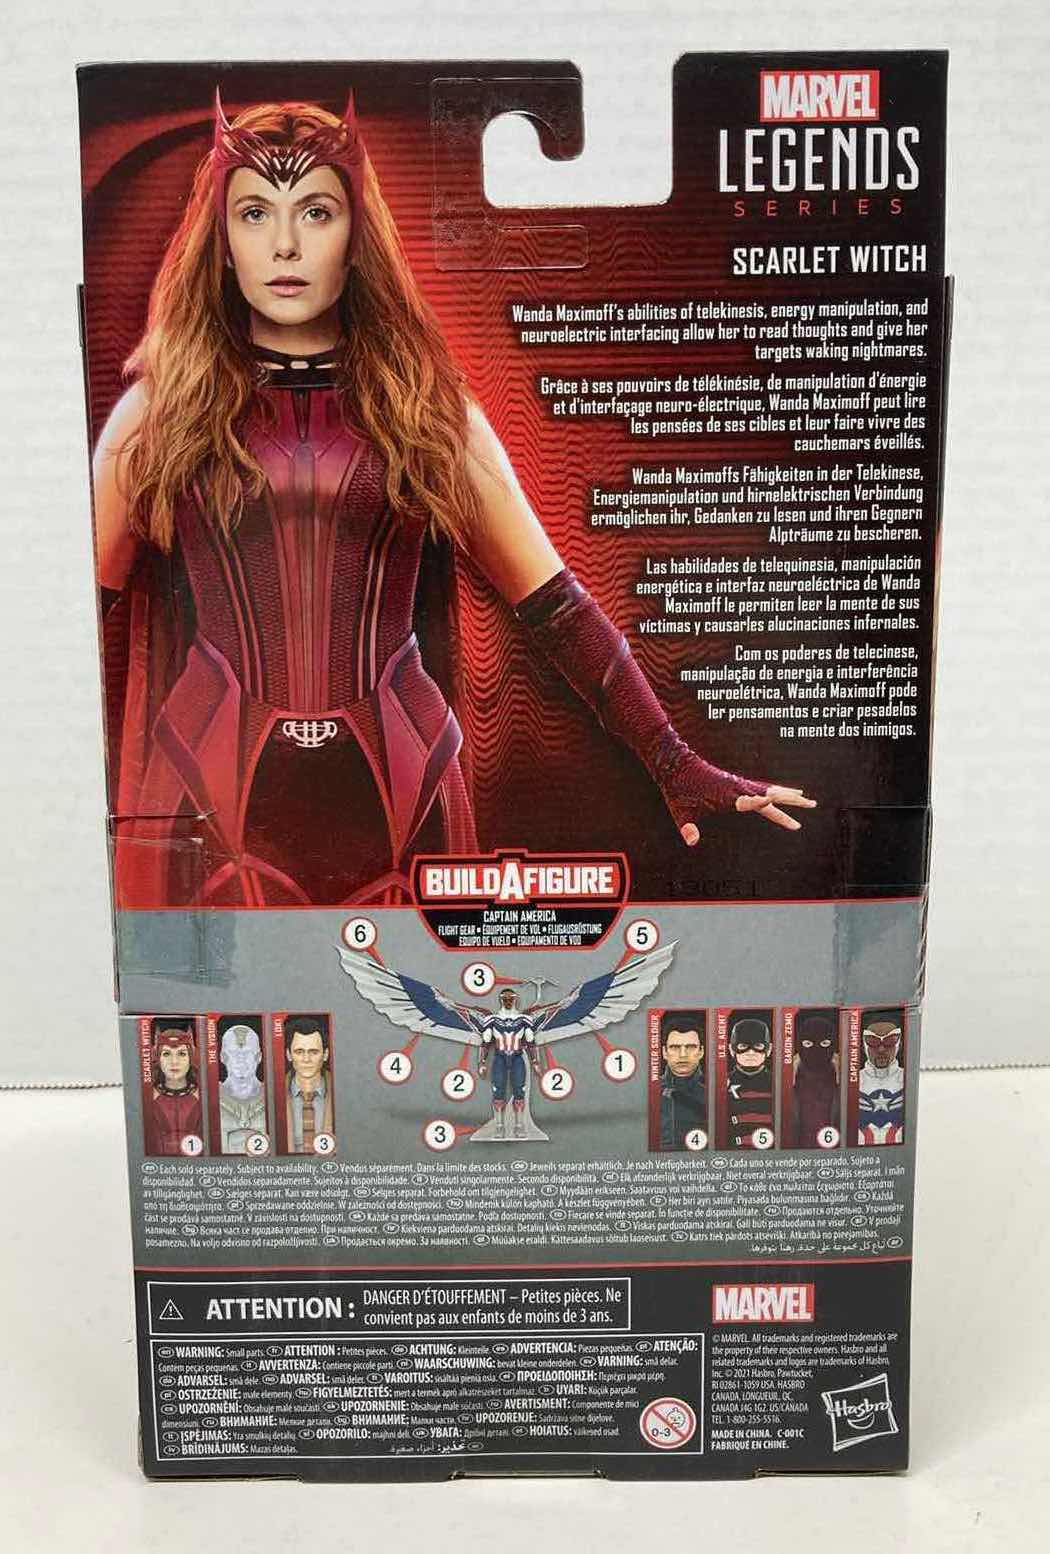 Photo 2 of NEW MARVEL LEGEND SERIES WANDA VISION ACTION FIGURE, SCARLET WITCH